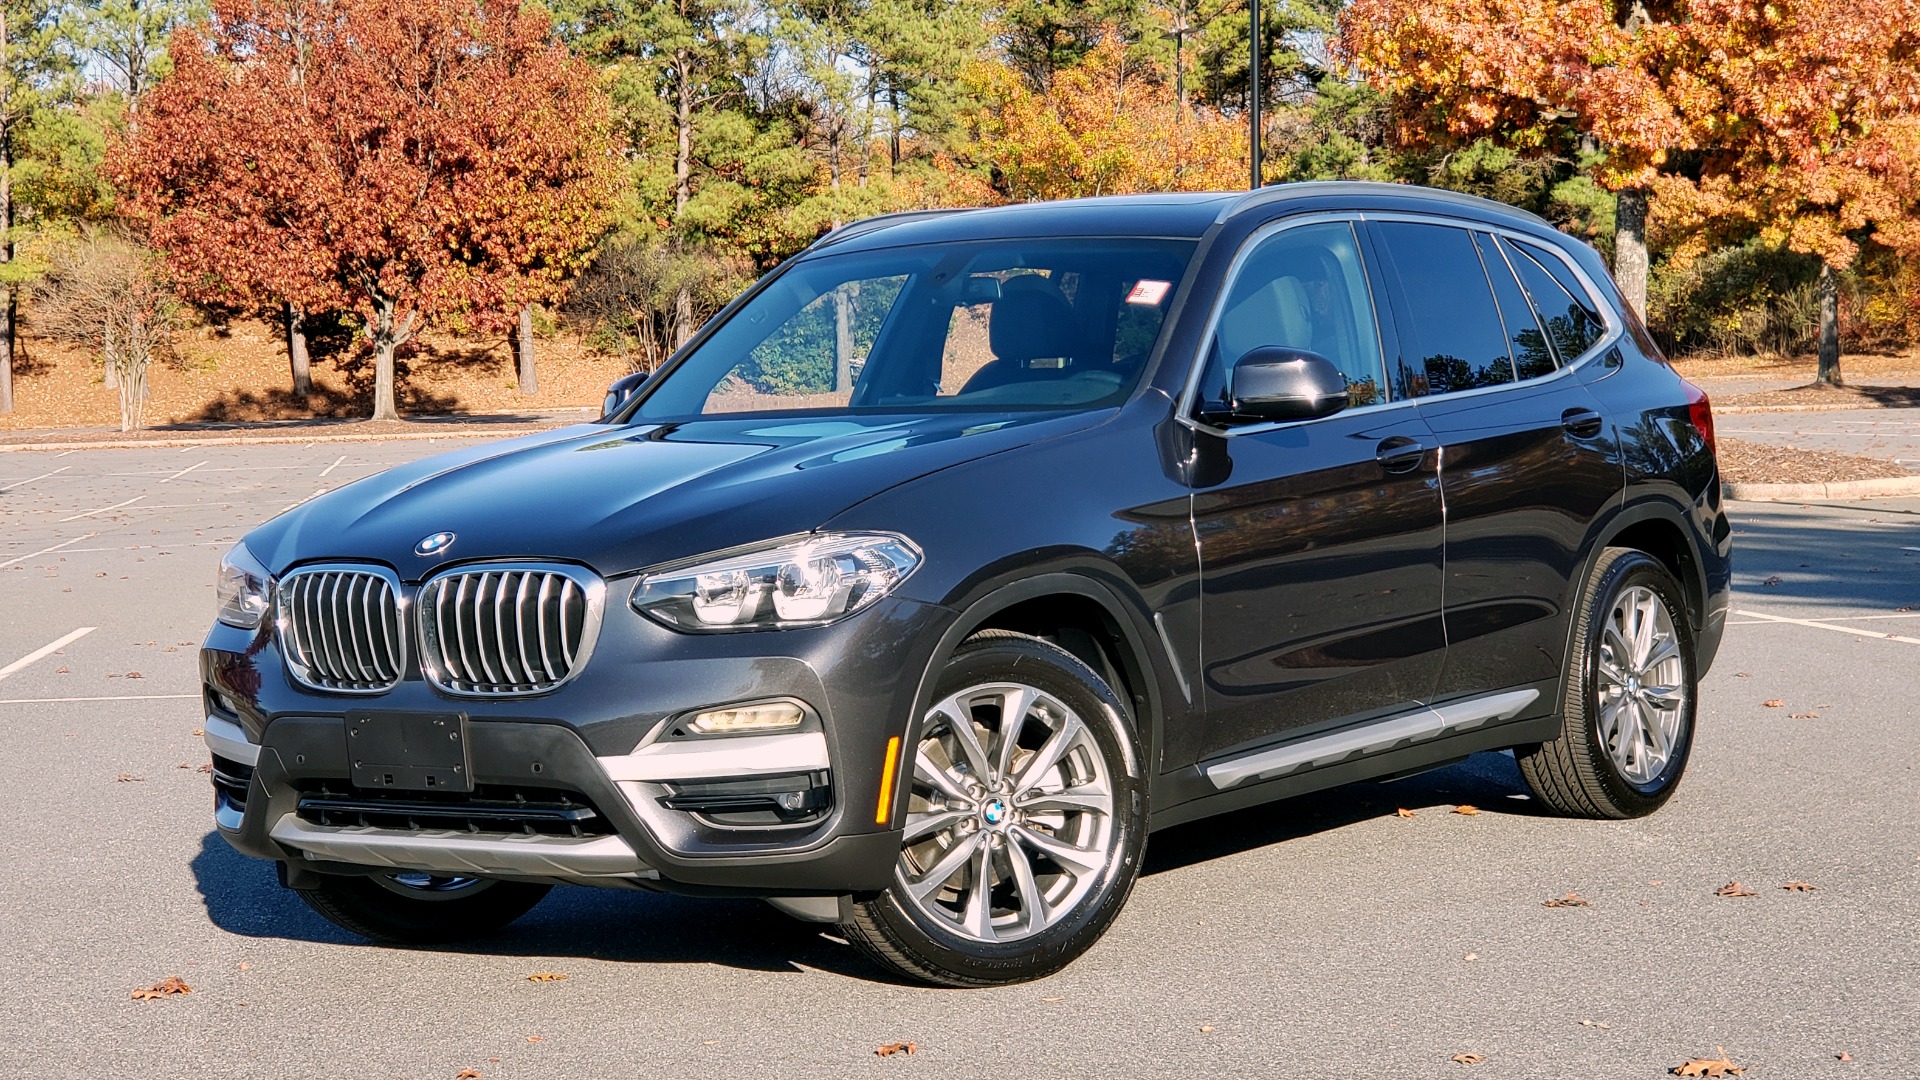 Used 2018 BMW X3 XDRIVE30I / NAV / PARK ASST / PANO-ROOF / HTD STS / REARVIEW for sale Sold at Formula Imports in Charlotte NC 28227 2